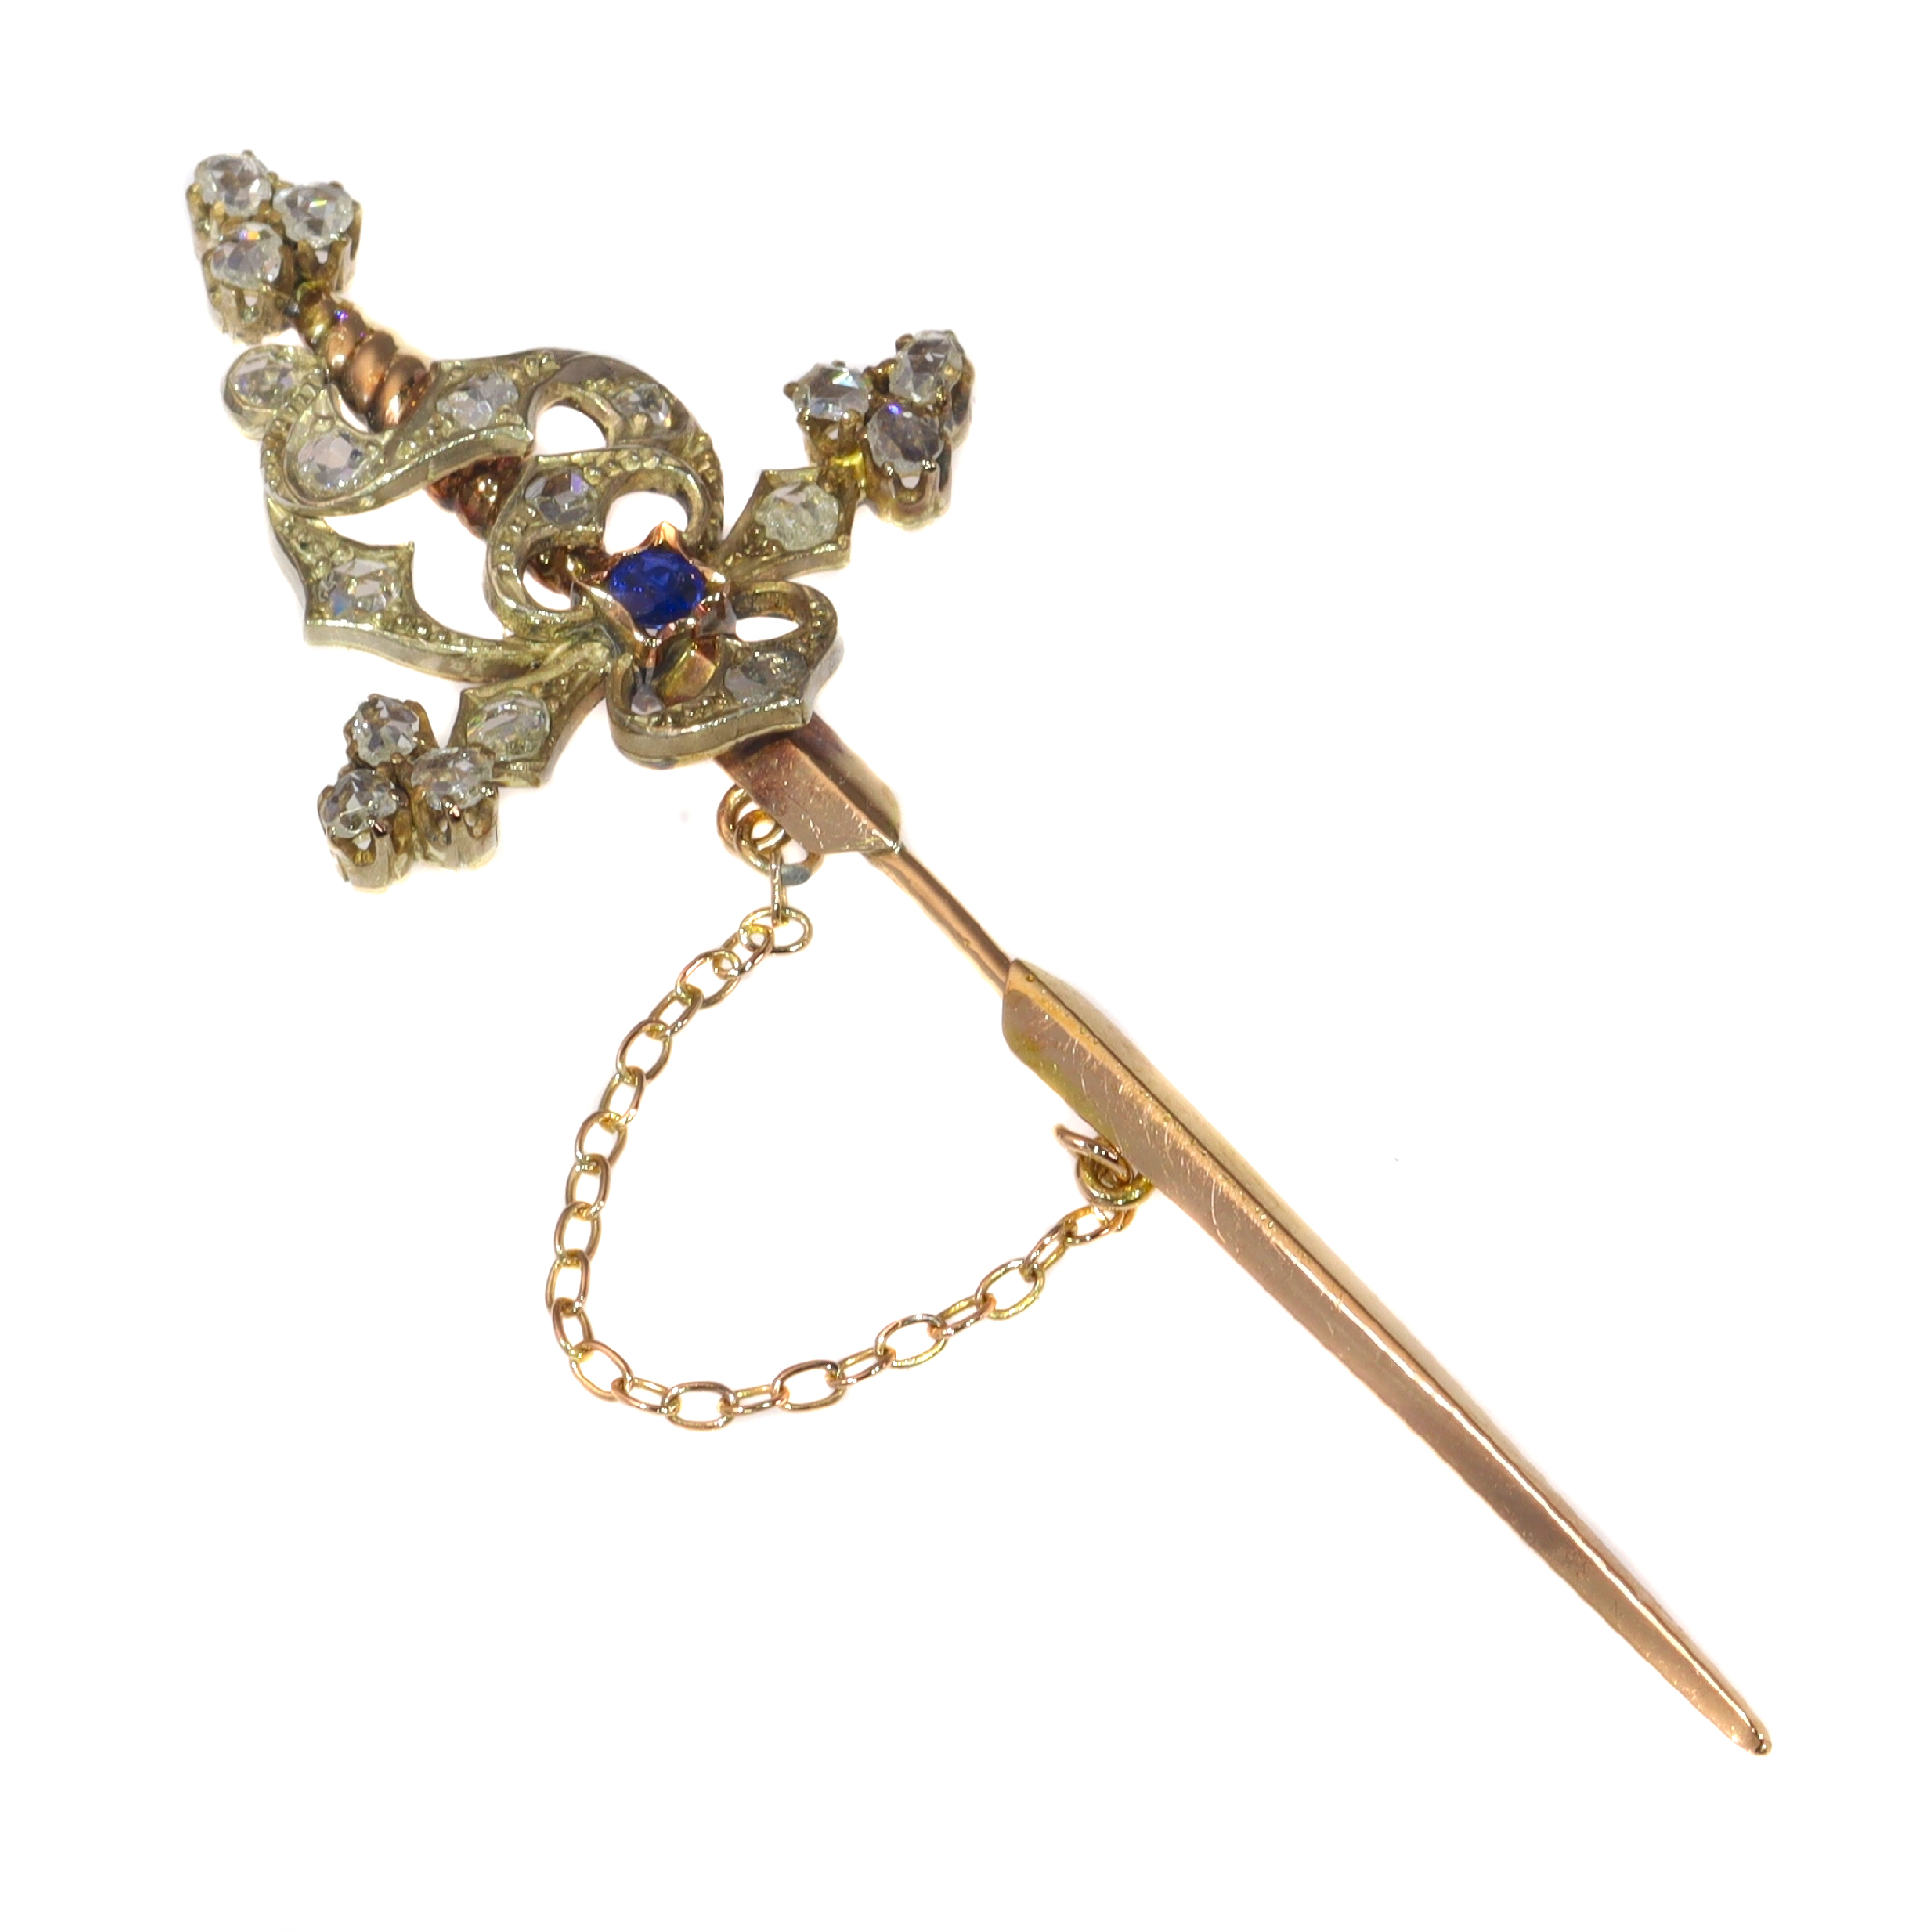 Vintage pin in the form of a sword set with diamonds and a sapphire